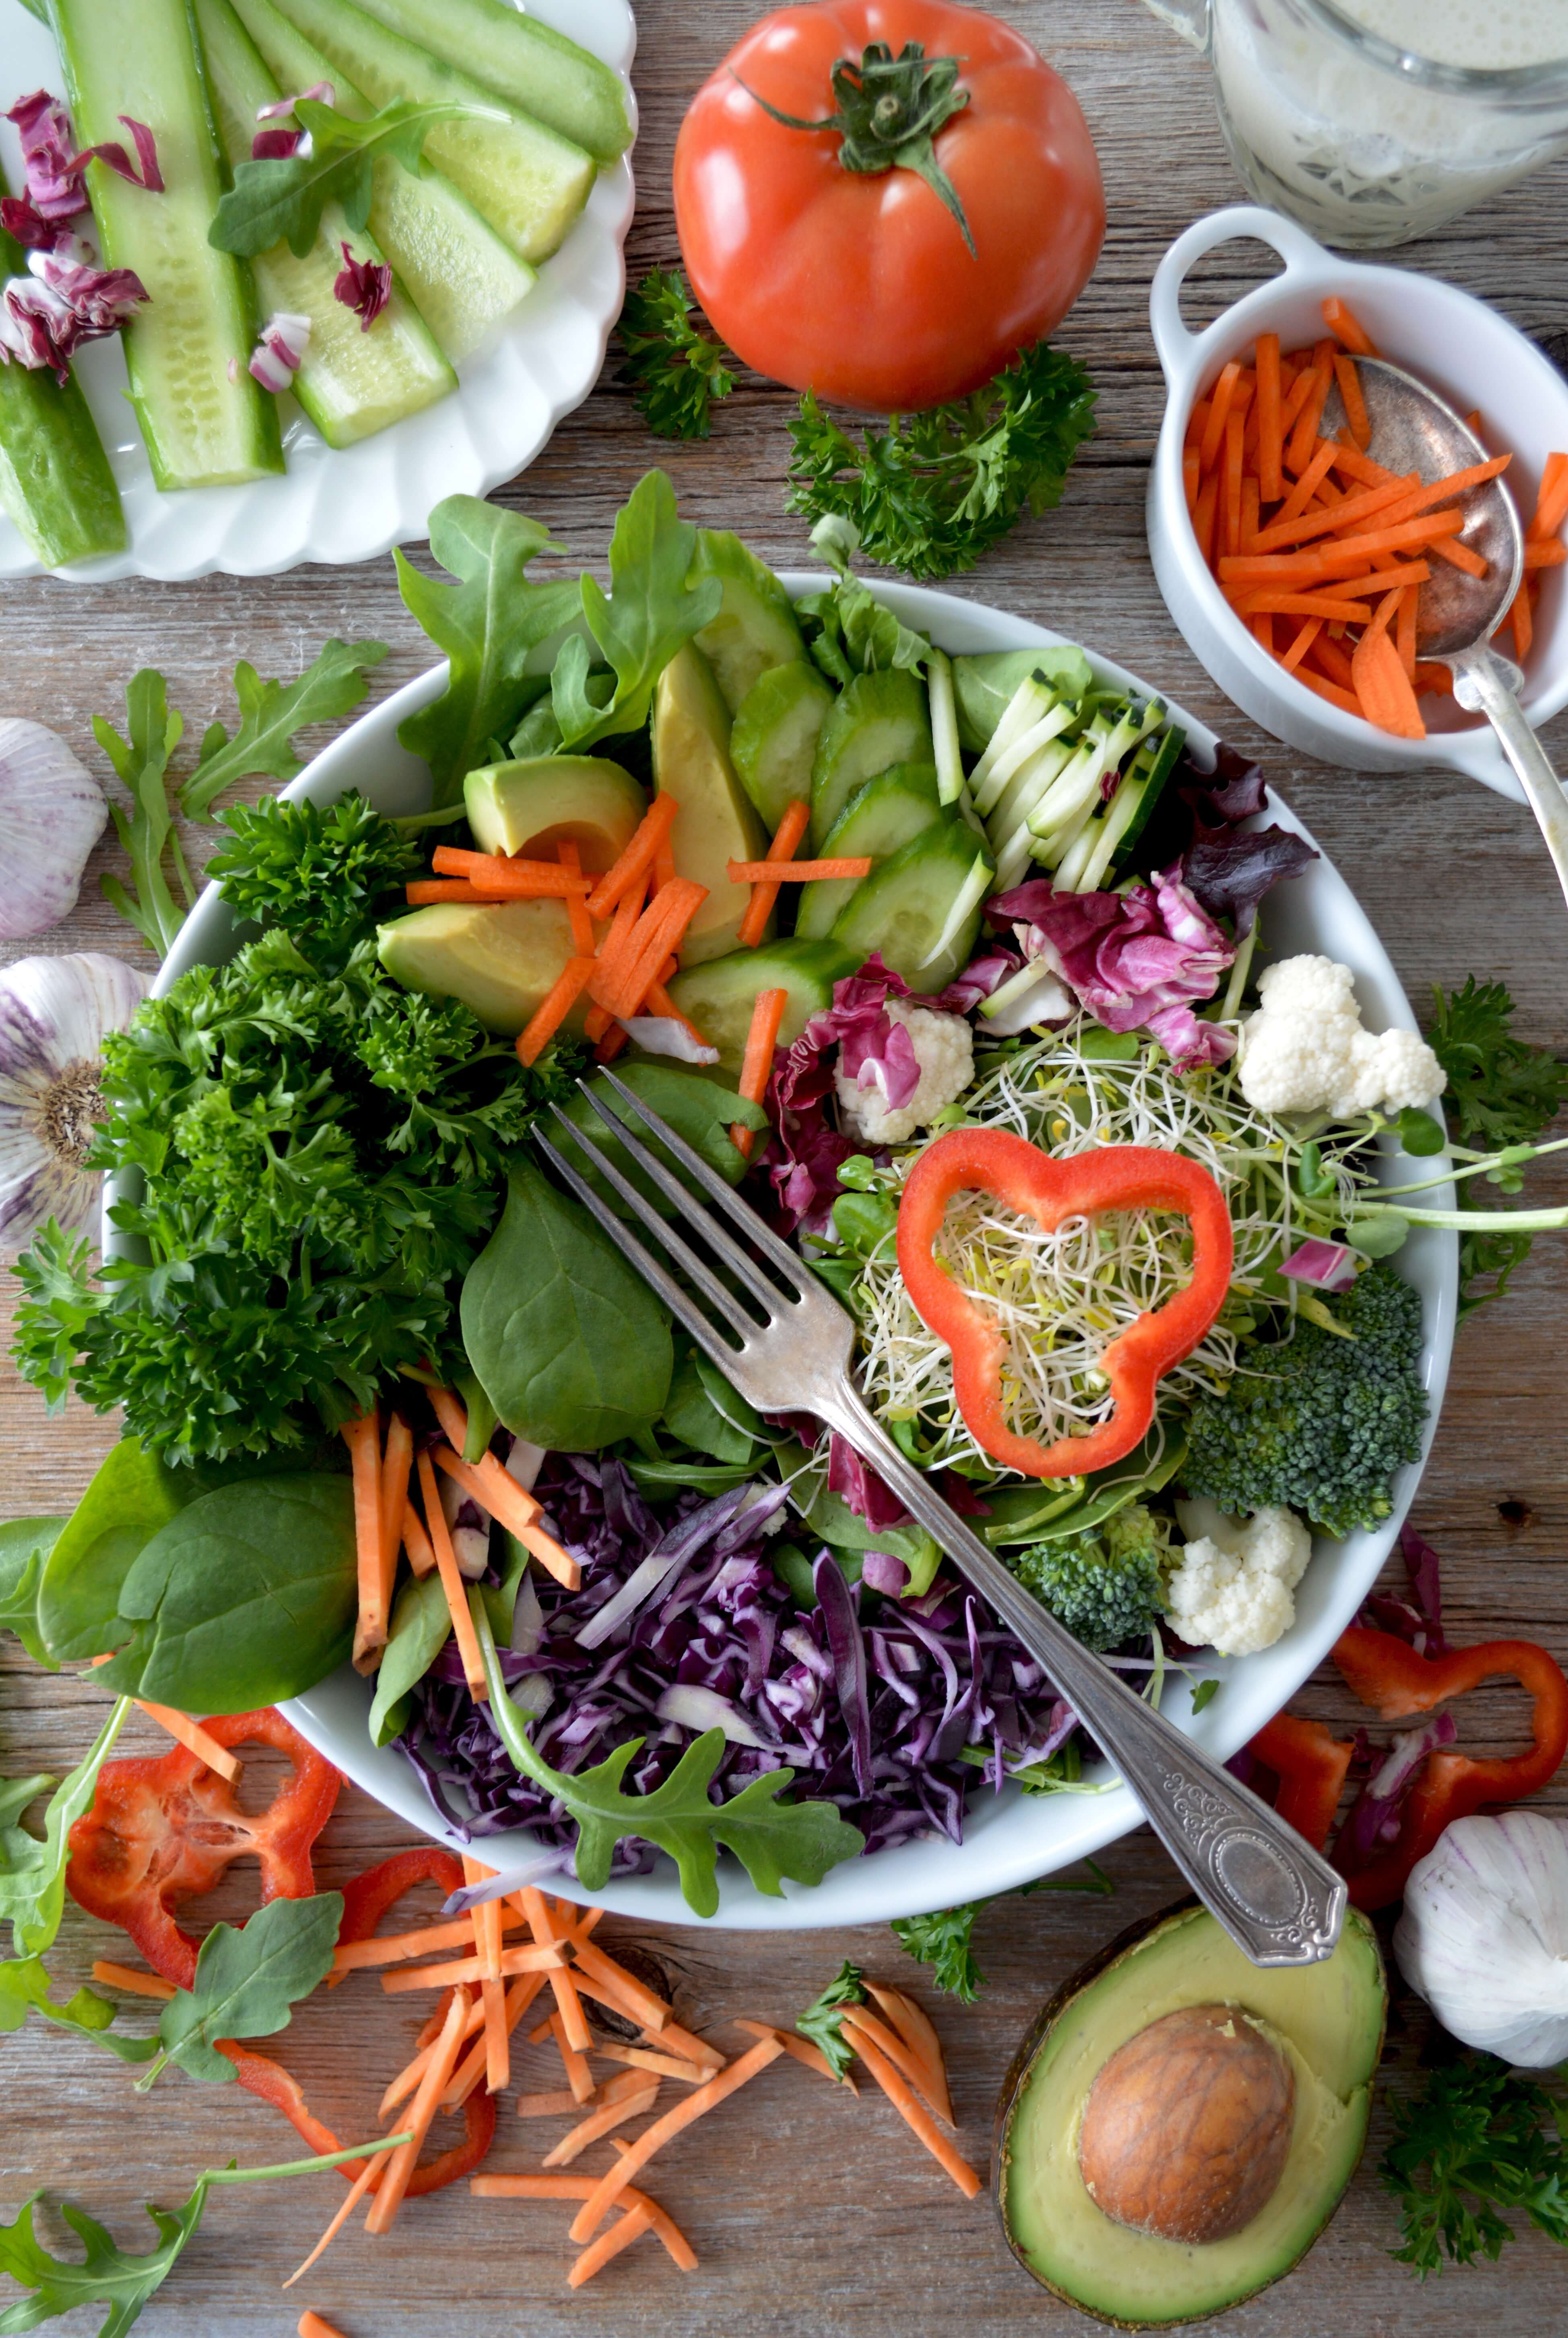 Are Vegans Healthier Than Meat-Eaters? | LIVEKINDLY